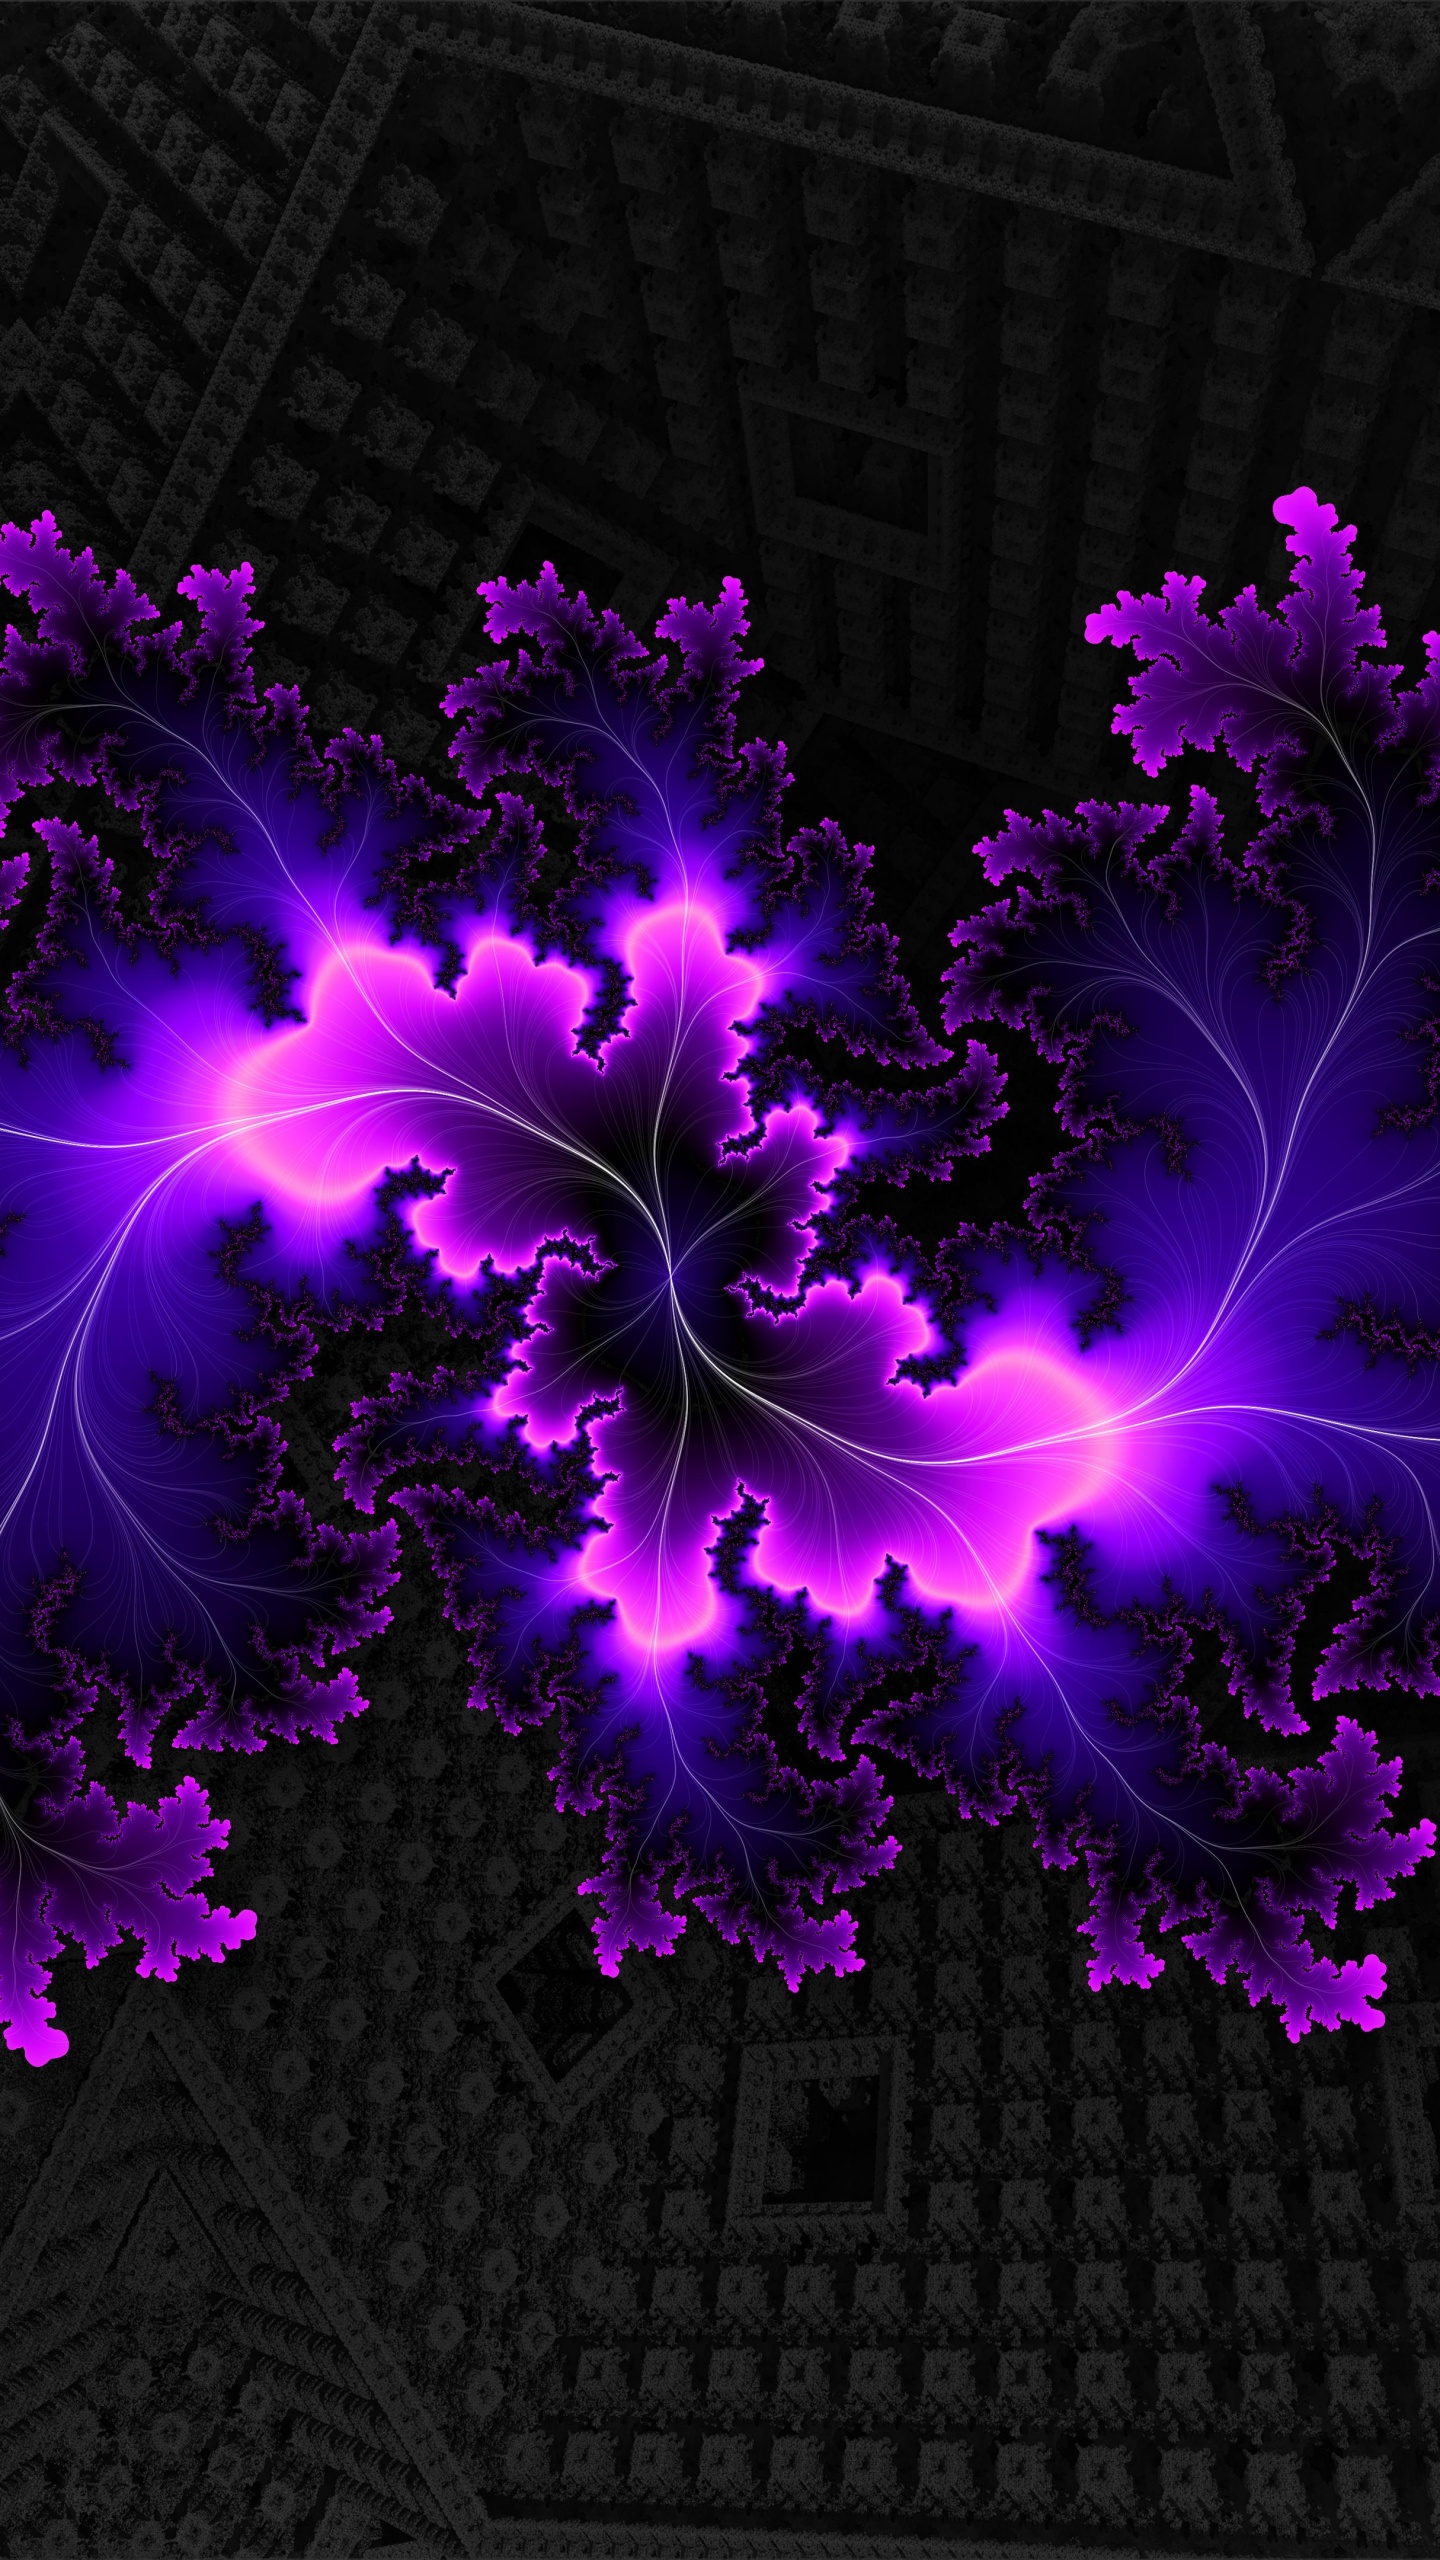 Purple Flower Petals on Black and White Textile. Wallpaper in 1440x2560 Resolution